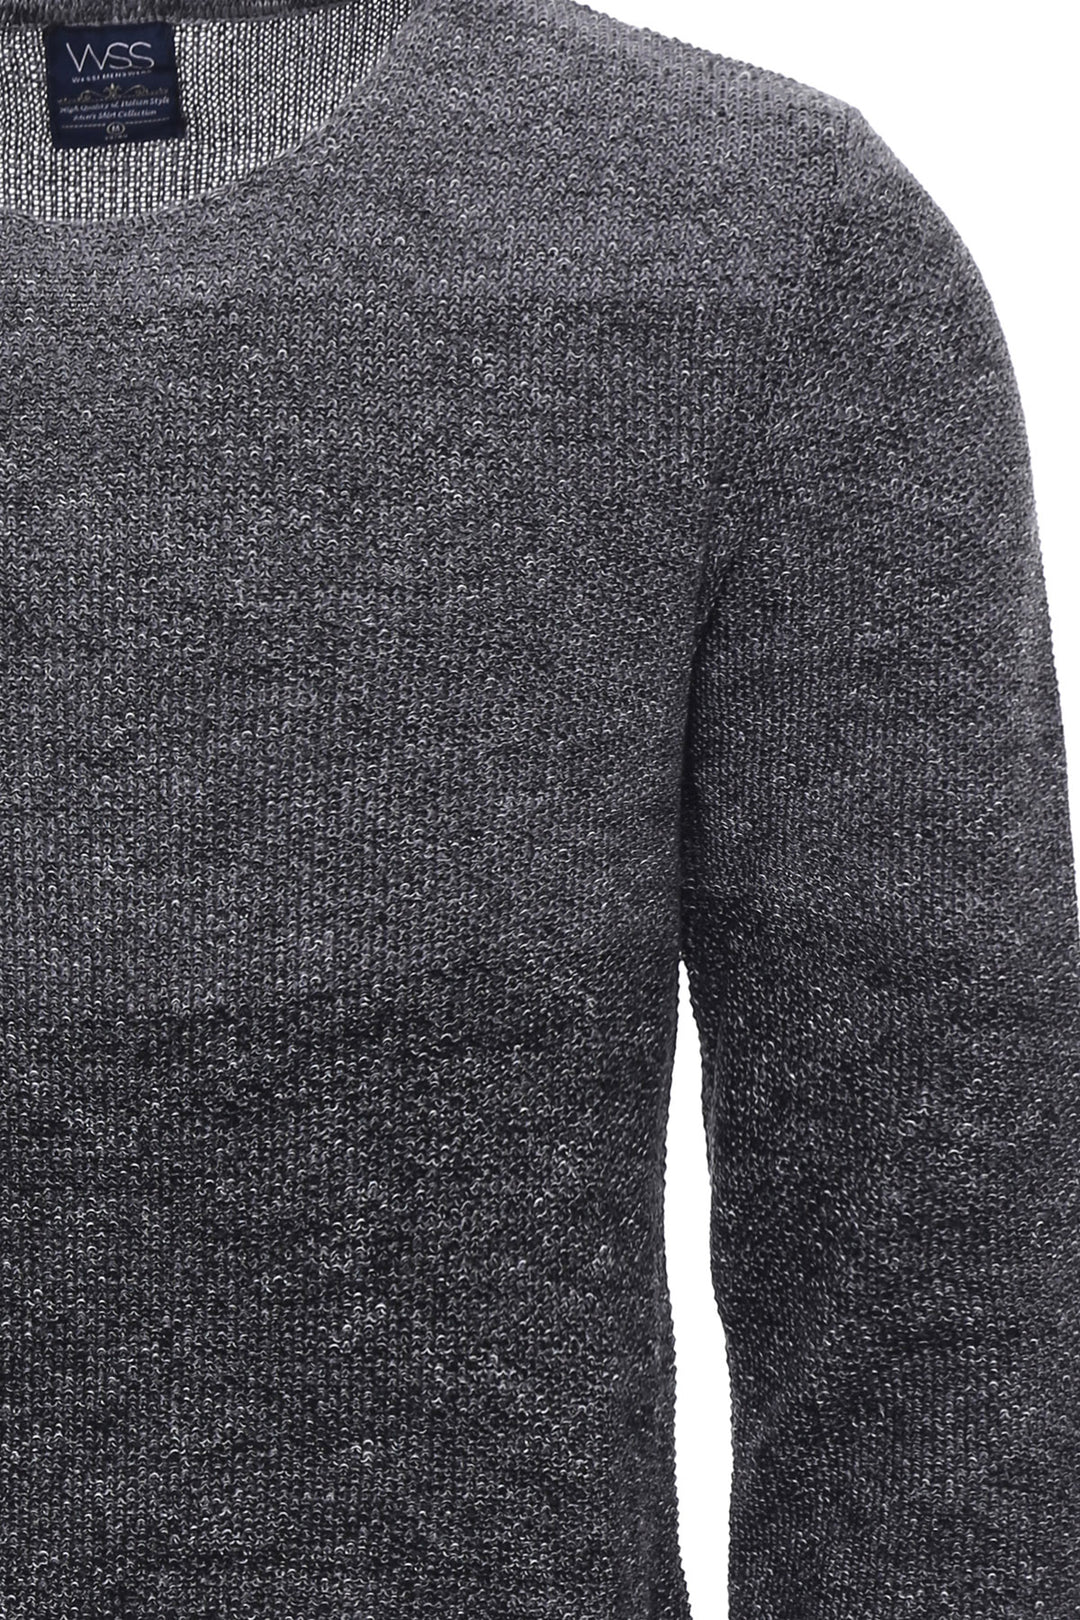 Circle Neck Patterned Grey Knitwear - Wessi